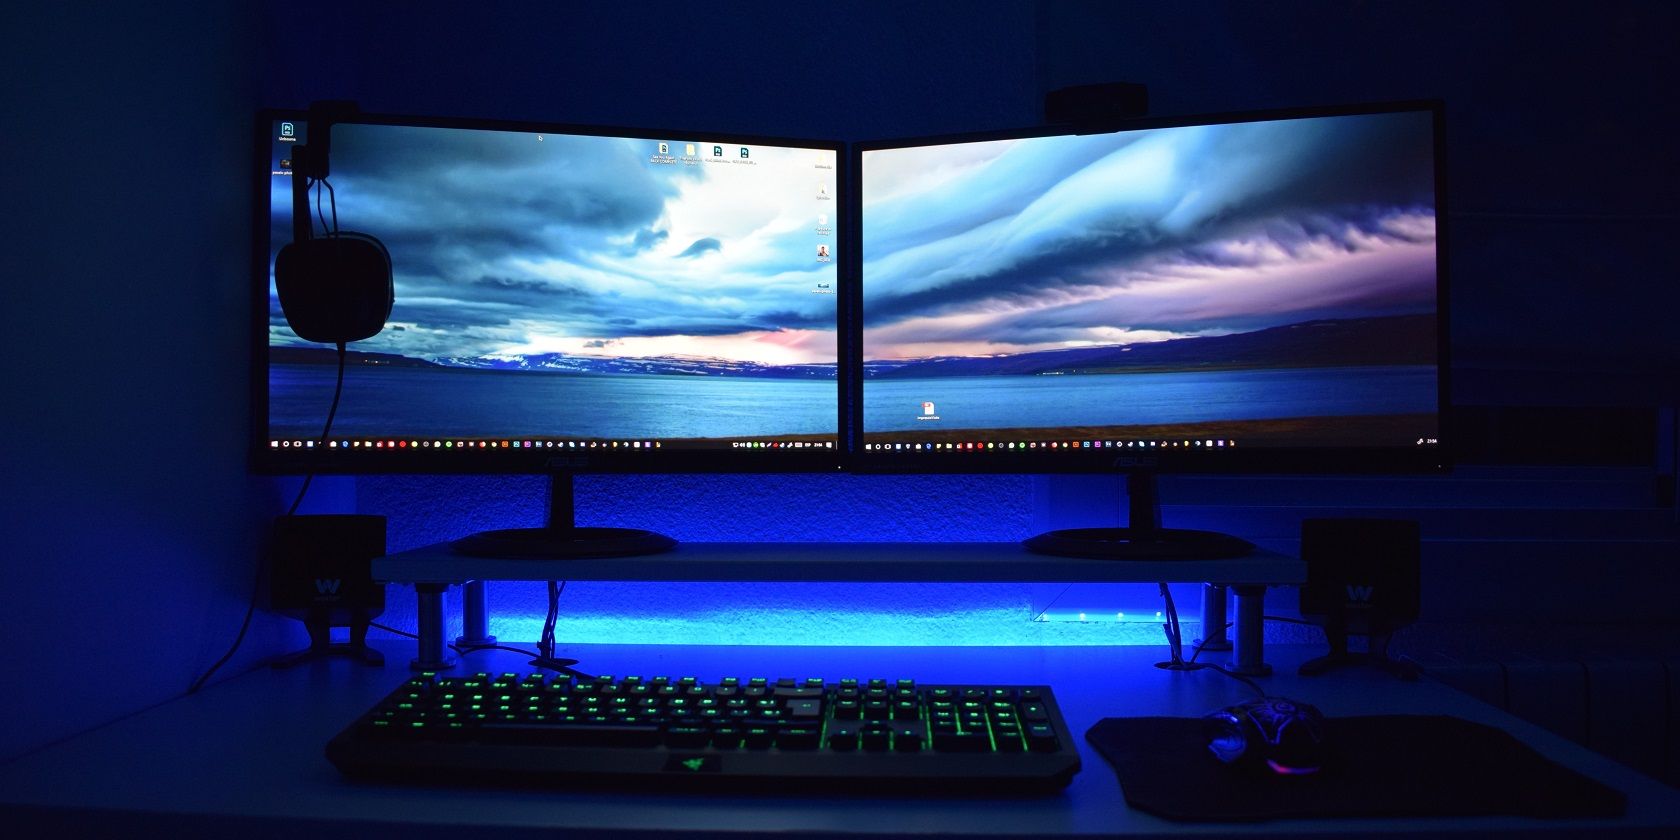 two monitors on a desk, side by side, with a keyboard and mouse